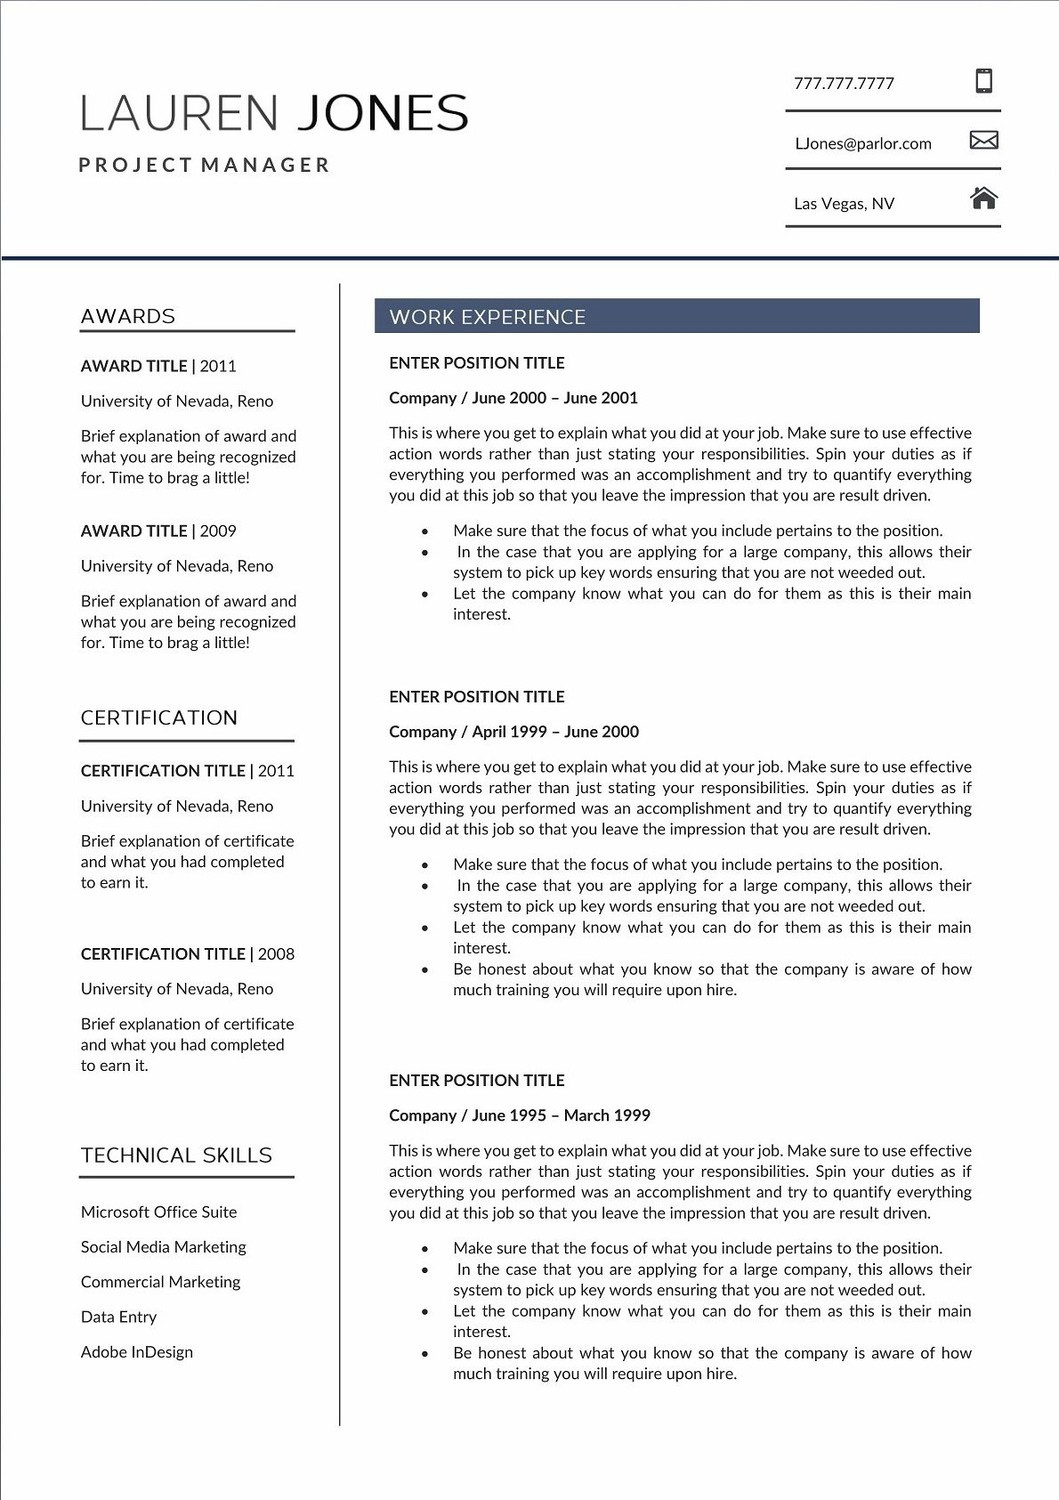 Good Introduction topic On Resume Sample 7 Simple Resume Templates to Raise Your Resume Game In 2017